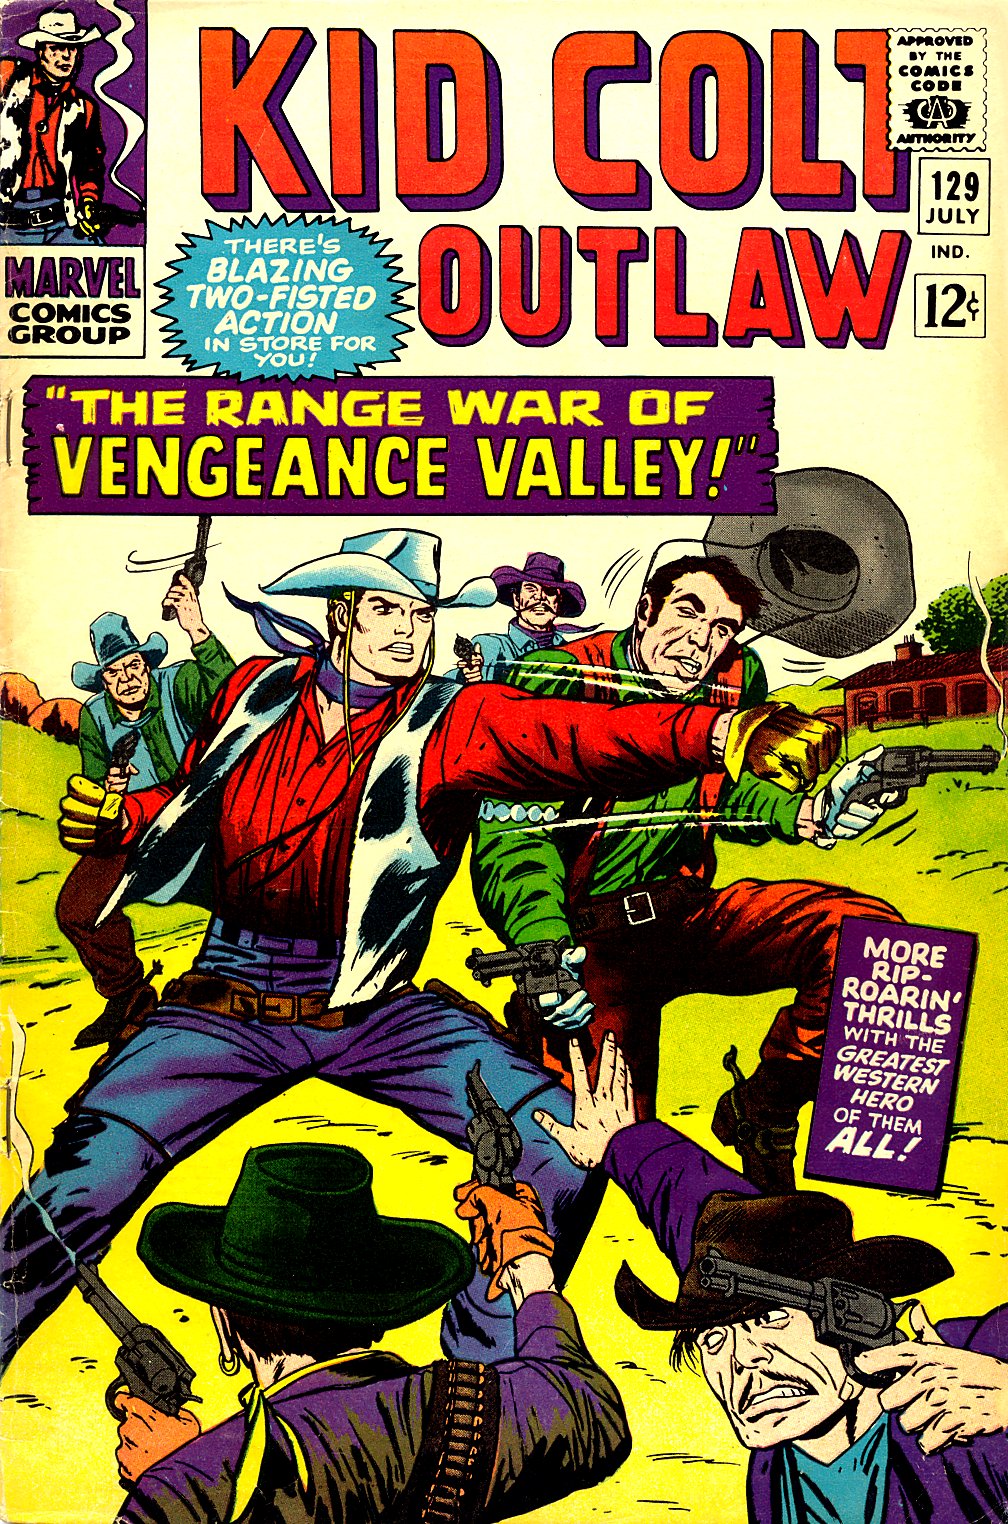 Read online Kid Colt Outlaw comic -  Issue #129 - 1